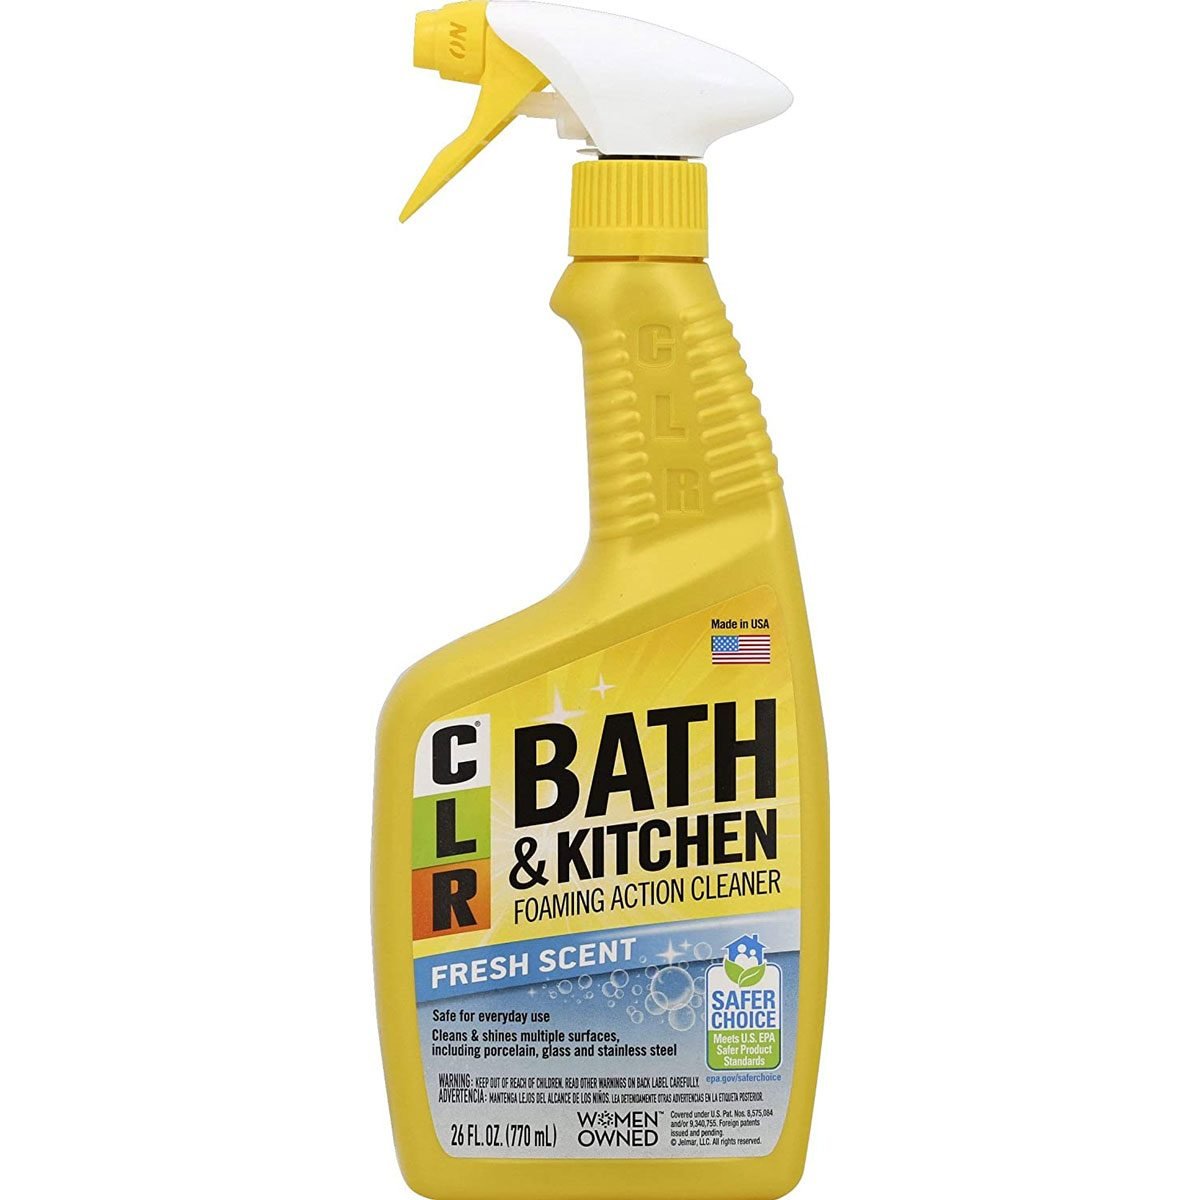 12 Best Cleaning Products for the Bathroom | The Family Handyman